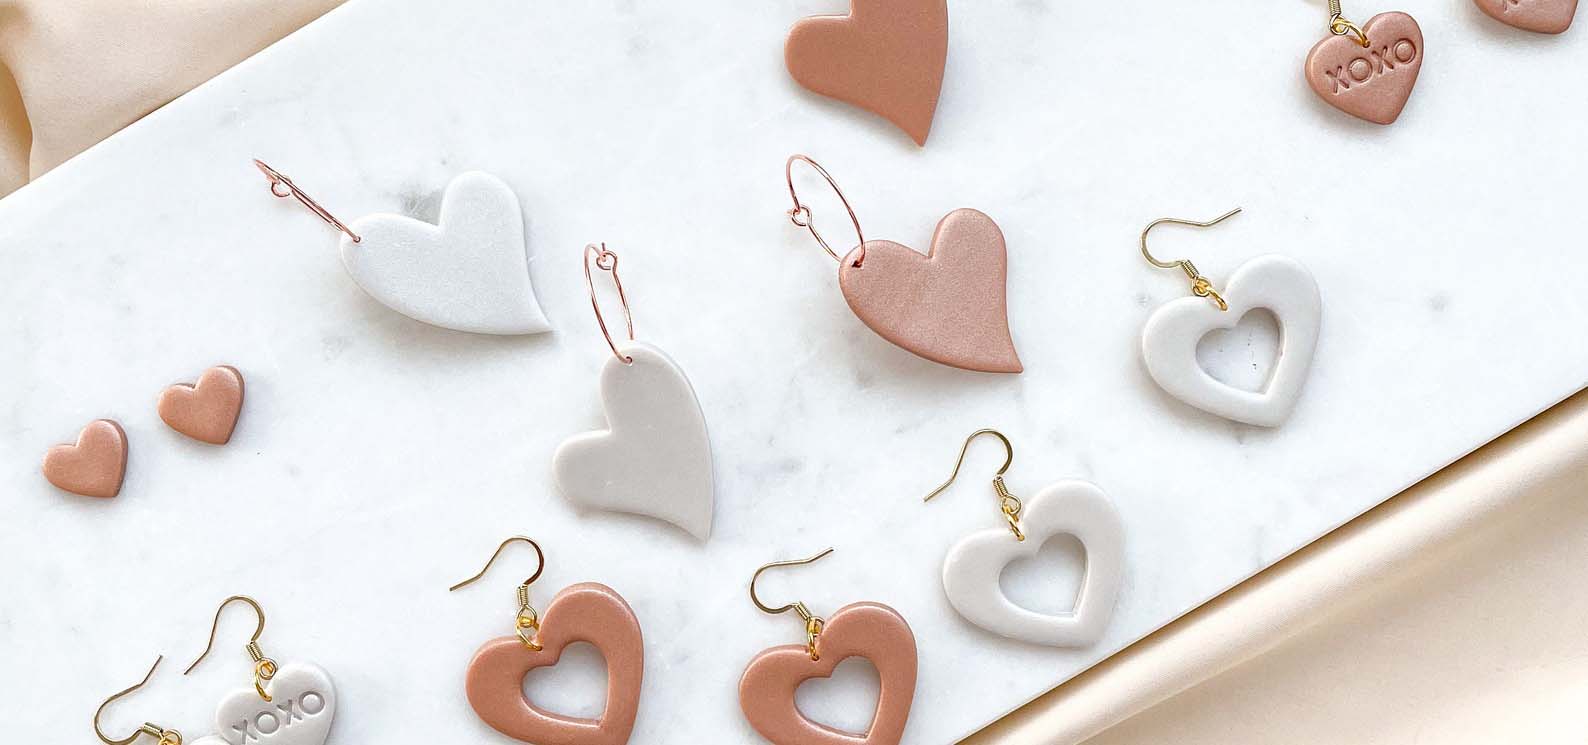 Display of heart-shaped earrings made from clay.